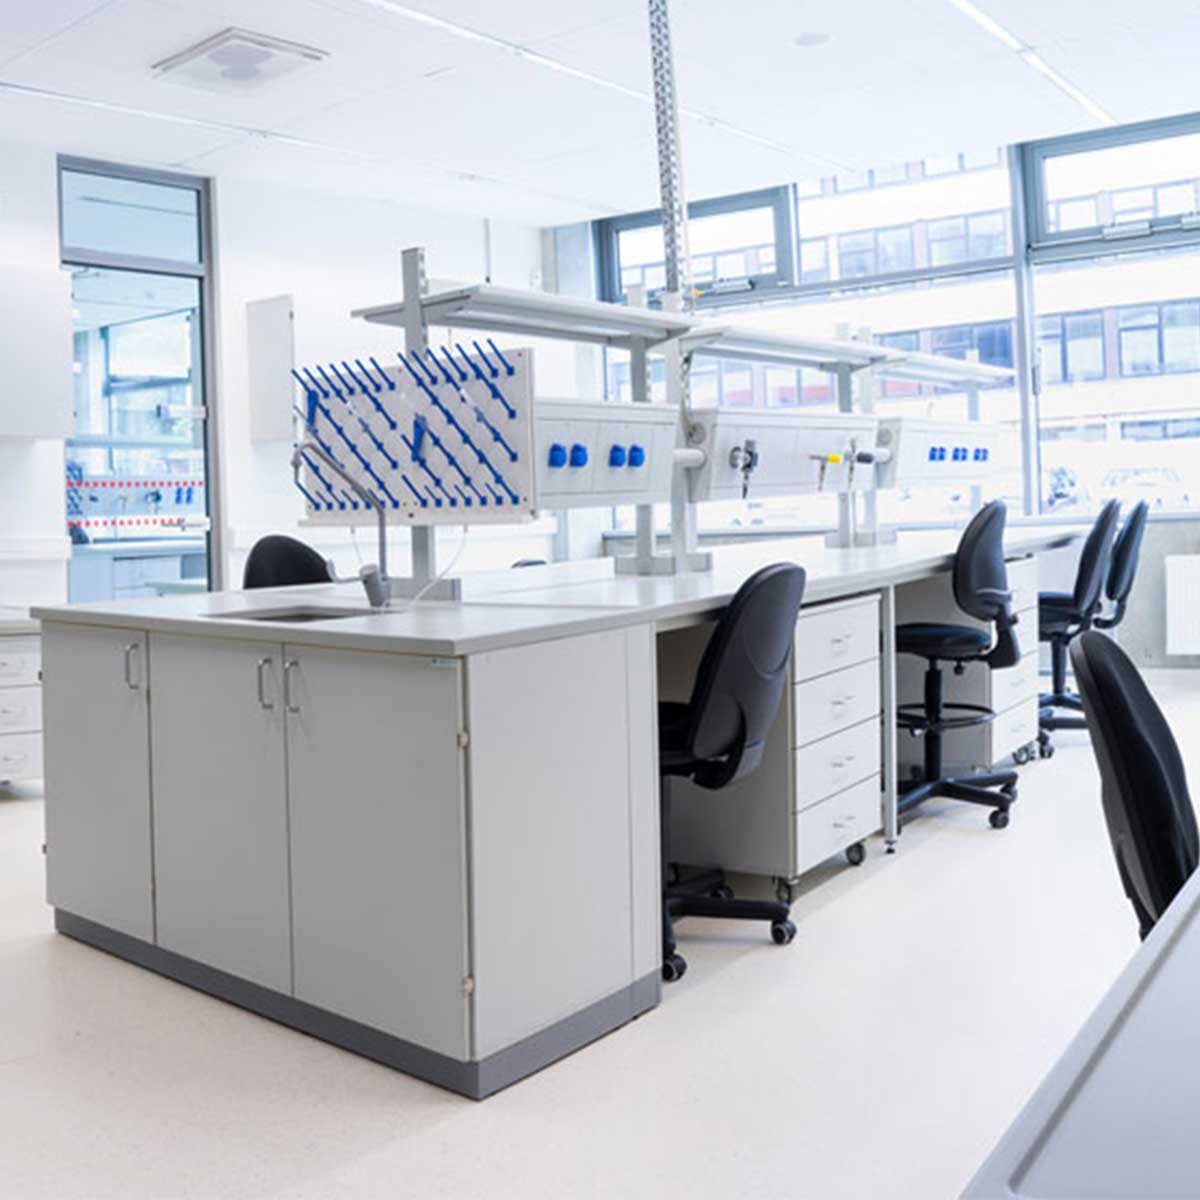 Chemistry Lab Furniture Manufacturers, Suppliers in Yusuf Sarai